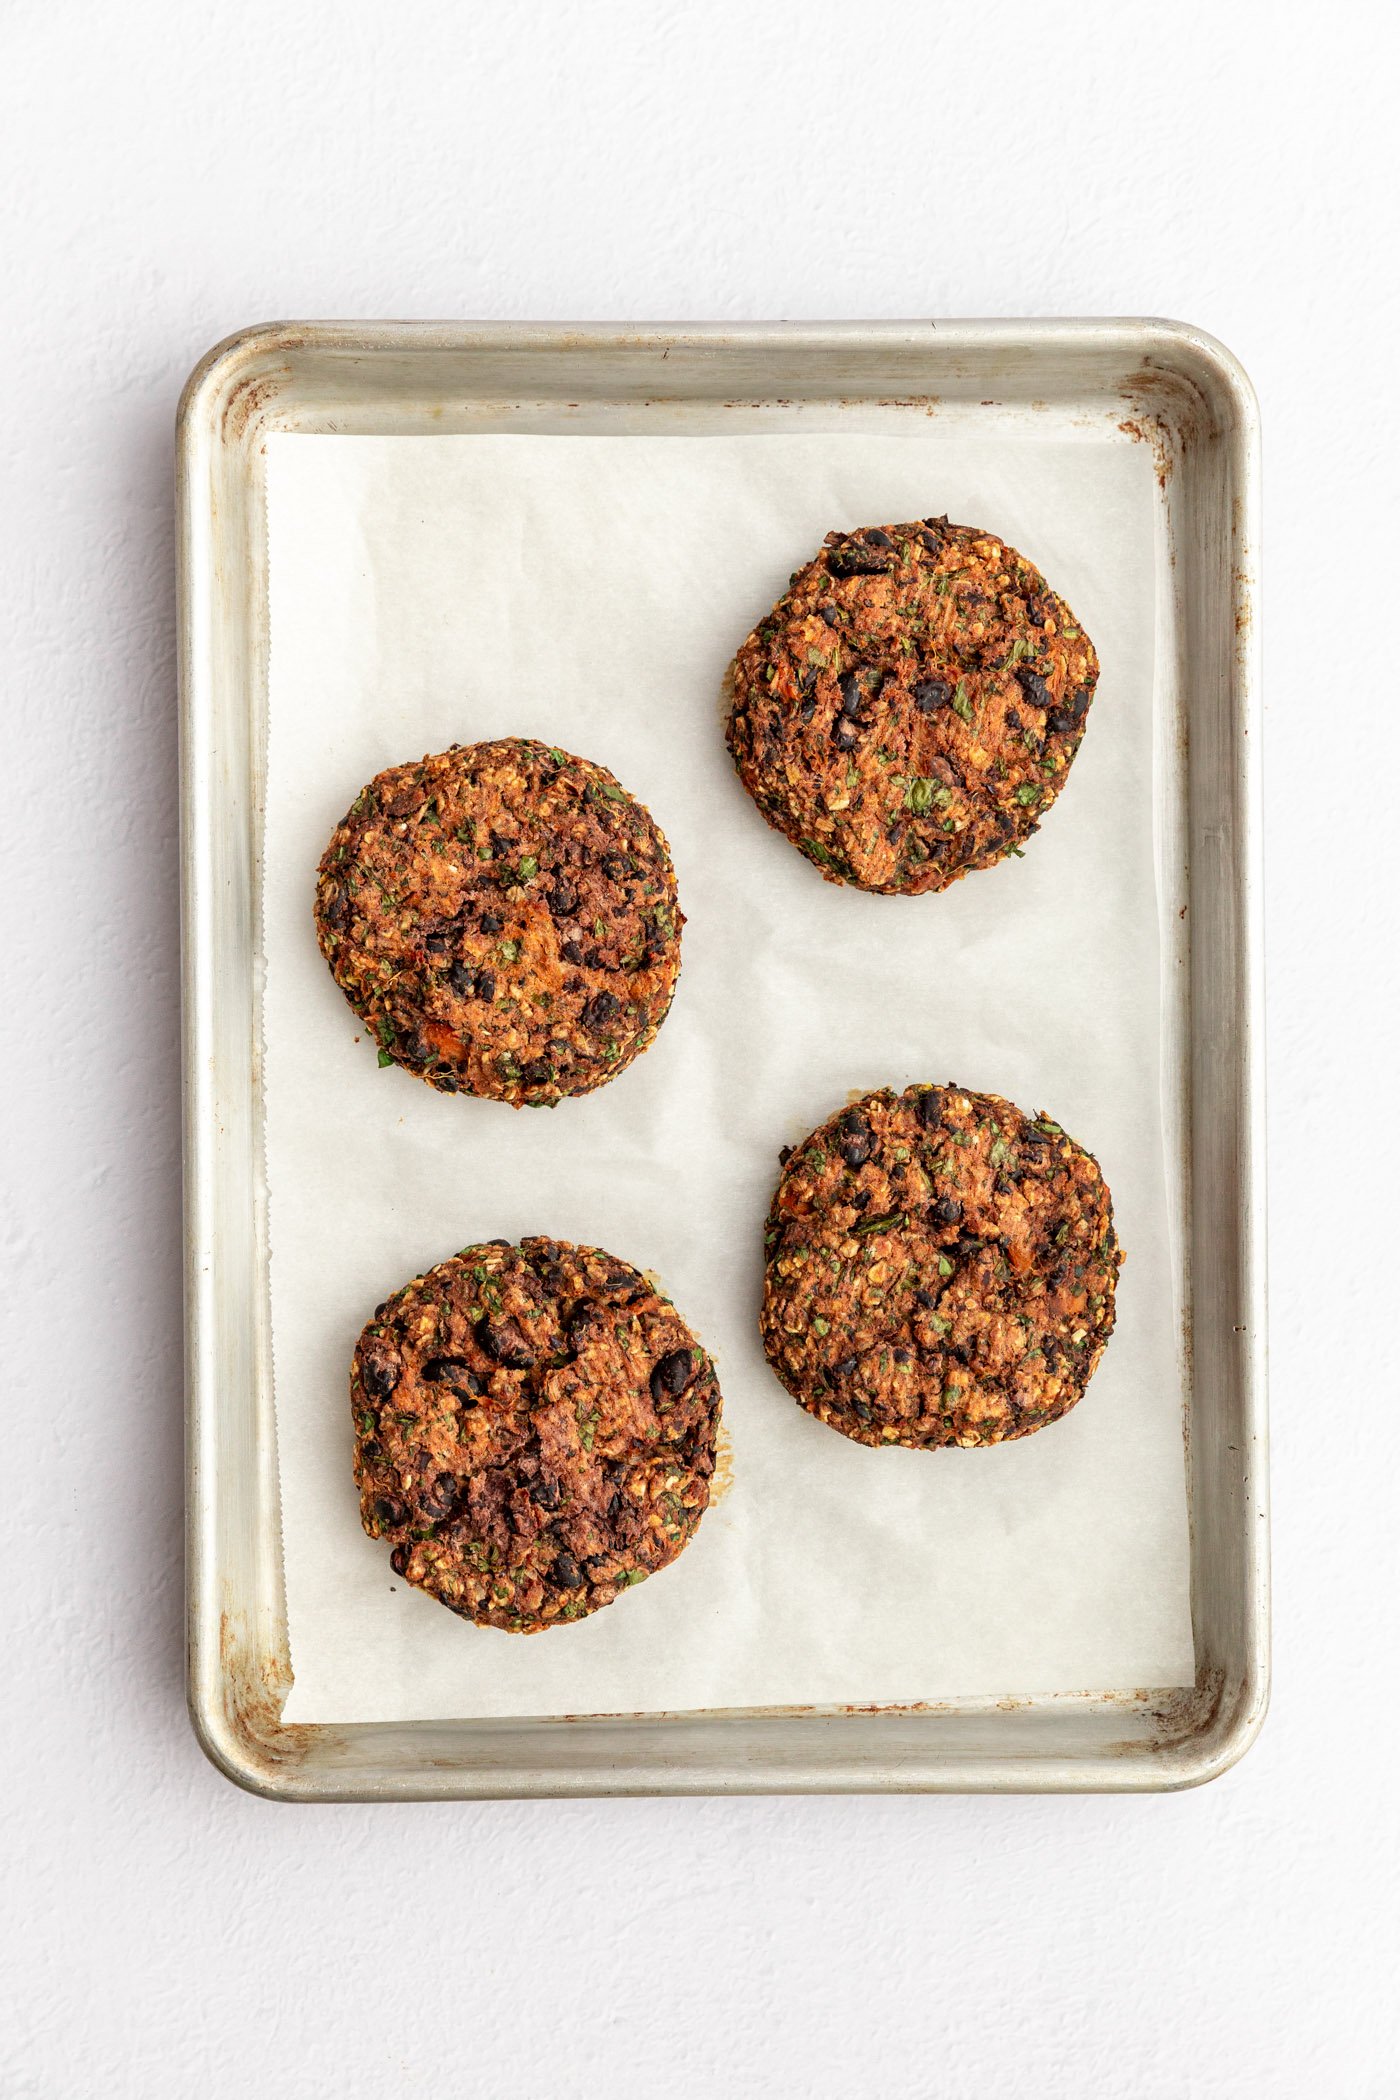 4 black bean sweet potato veggie burger patties on a lined baking sheet after being cooked.